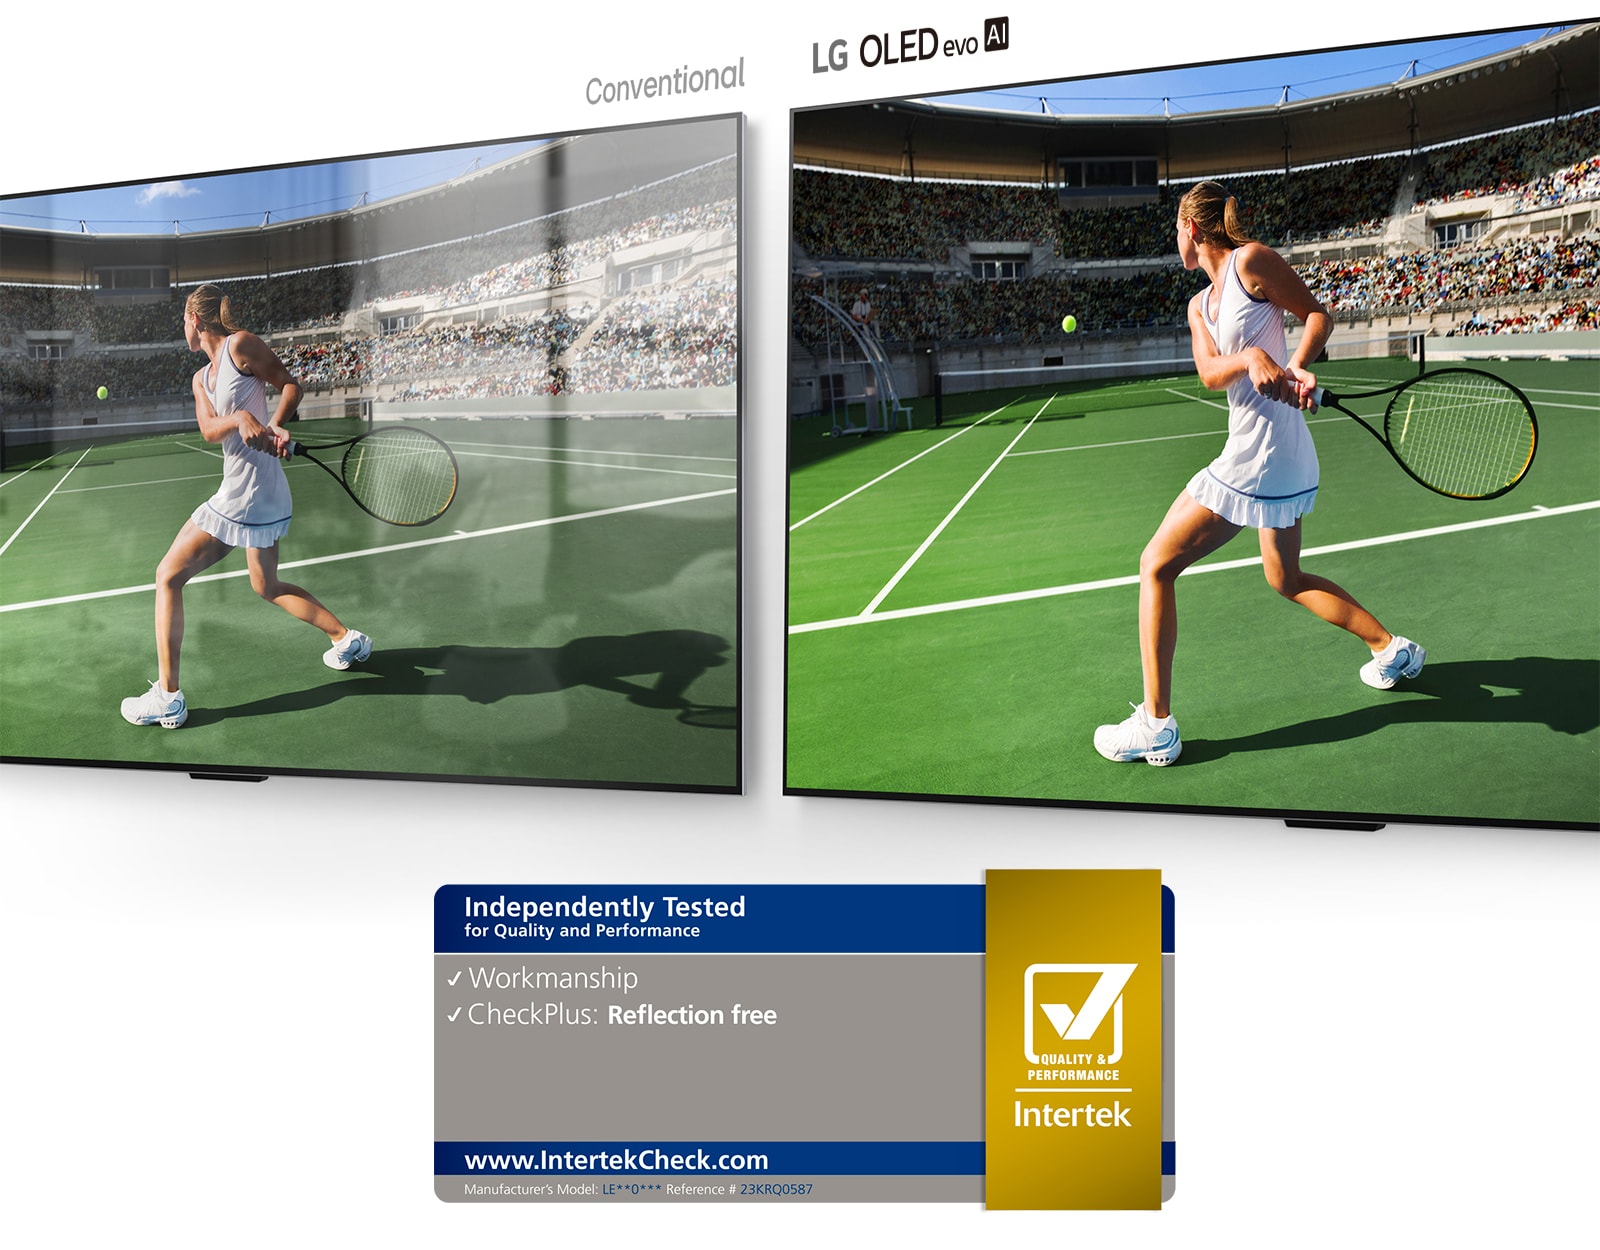 On the left, a conventional TV showing a tennis player in a stadium with room reflection on the screen. On the right, LG OLED evo AI G4 showing the same image of a tennis player in a stadium with no room reflection, and the image looks brighter and more colorful.